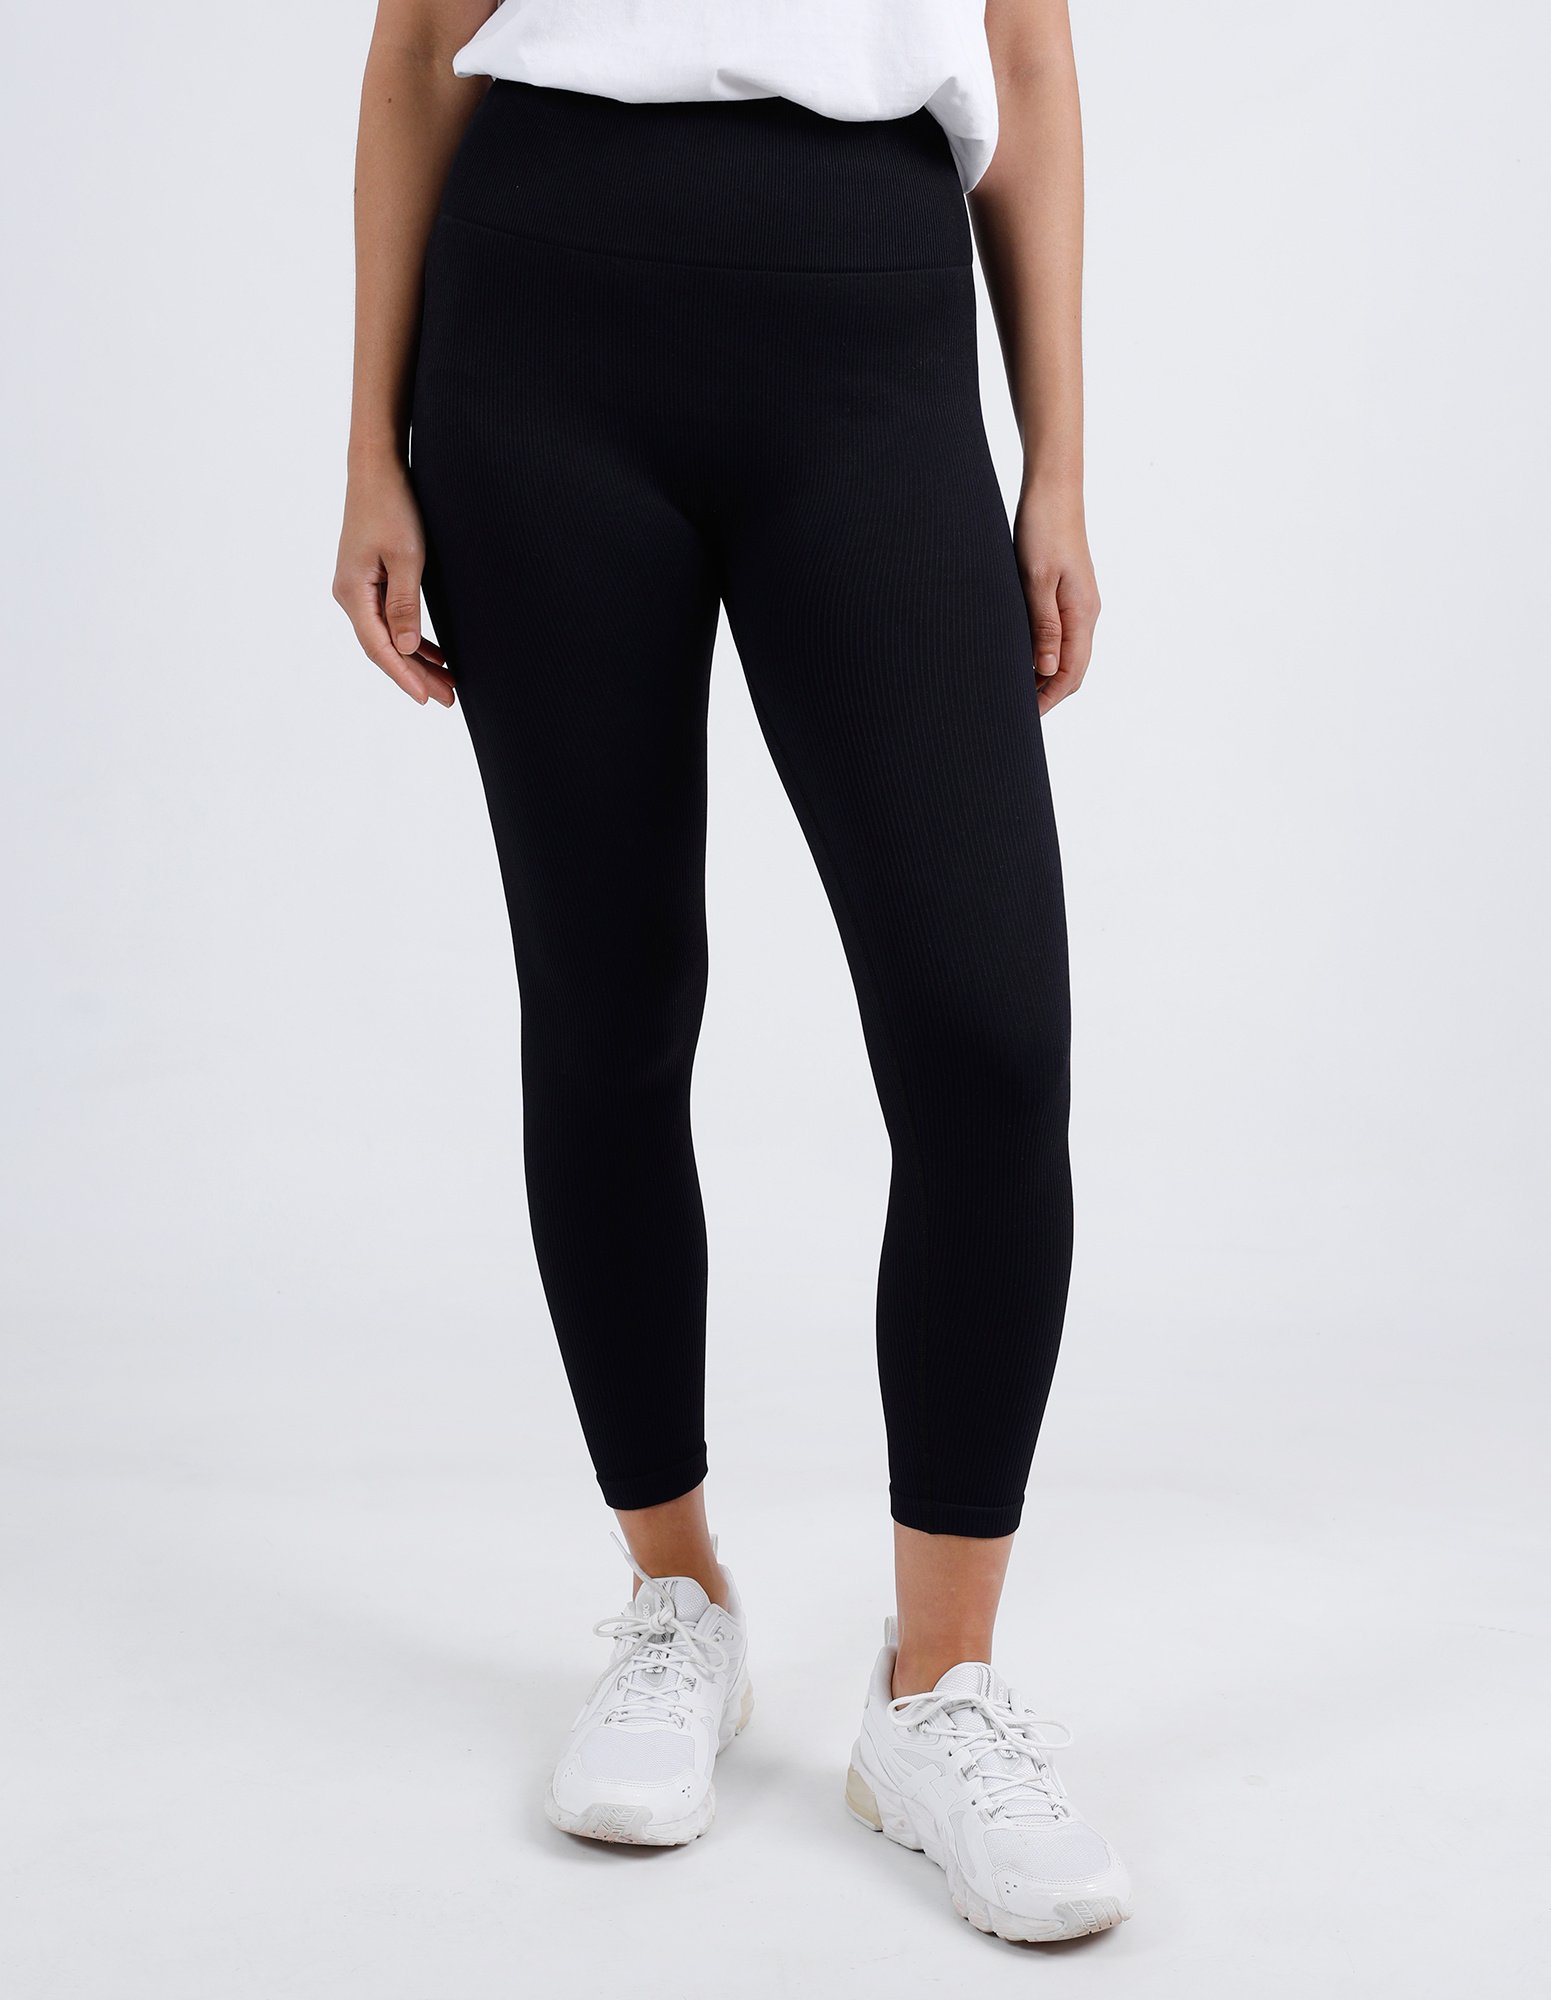 Women's Leggings, Tights & Sports Clothes | Cotton On USA